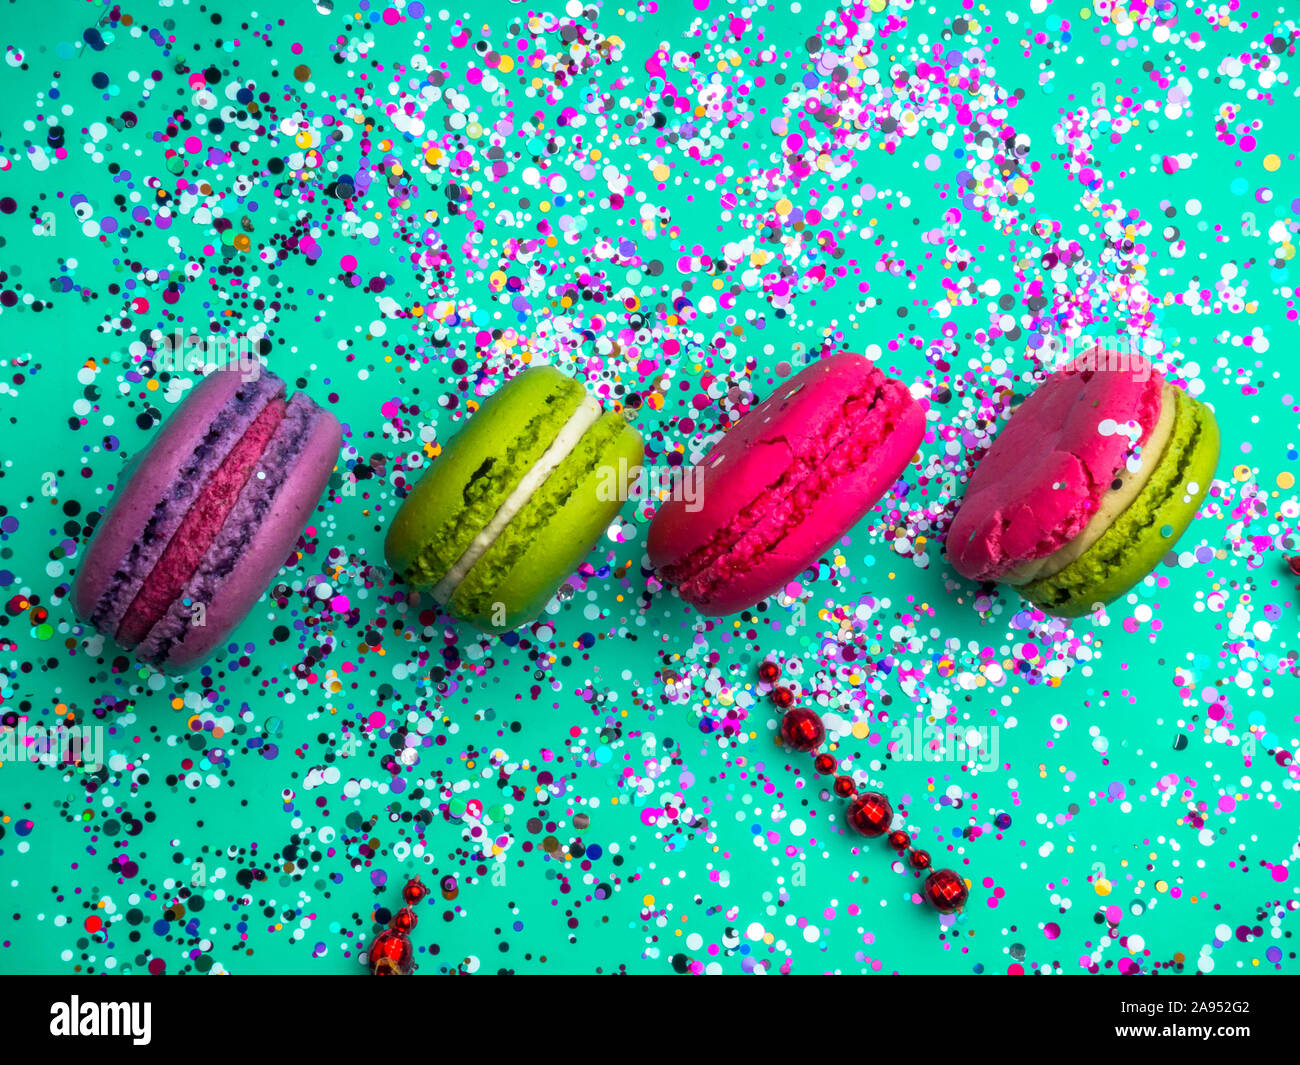 Festive flat lay with colorful confetti and macaroons on trendy mint turquoise background. Holiday concept. Stock Photo